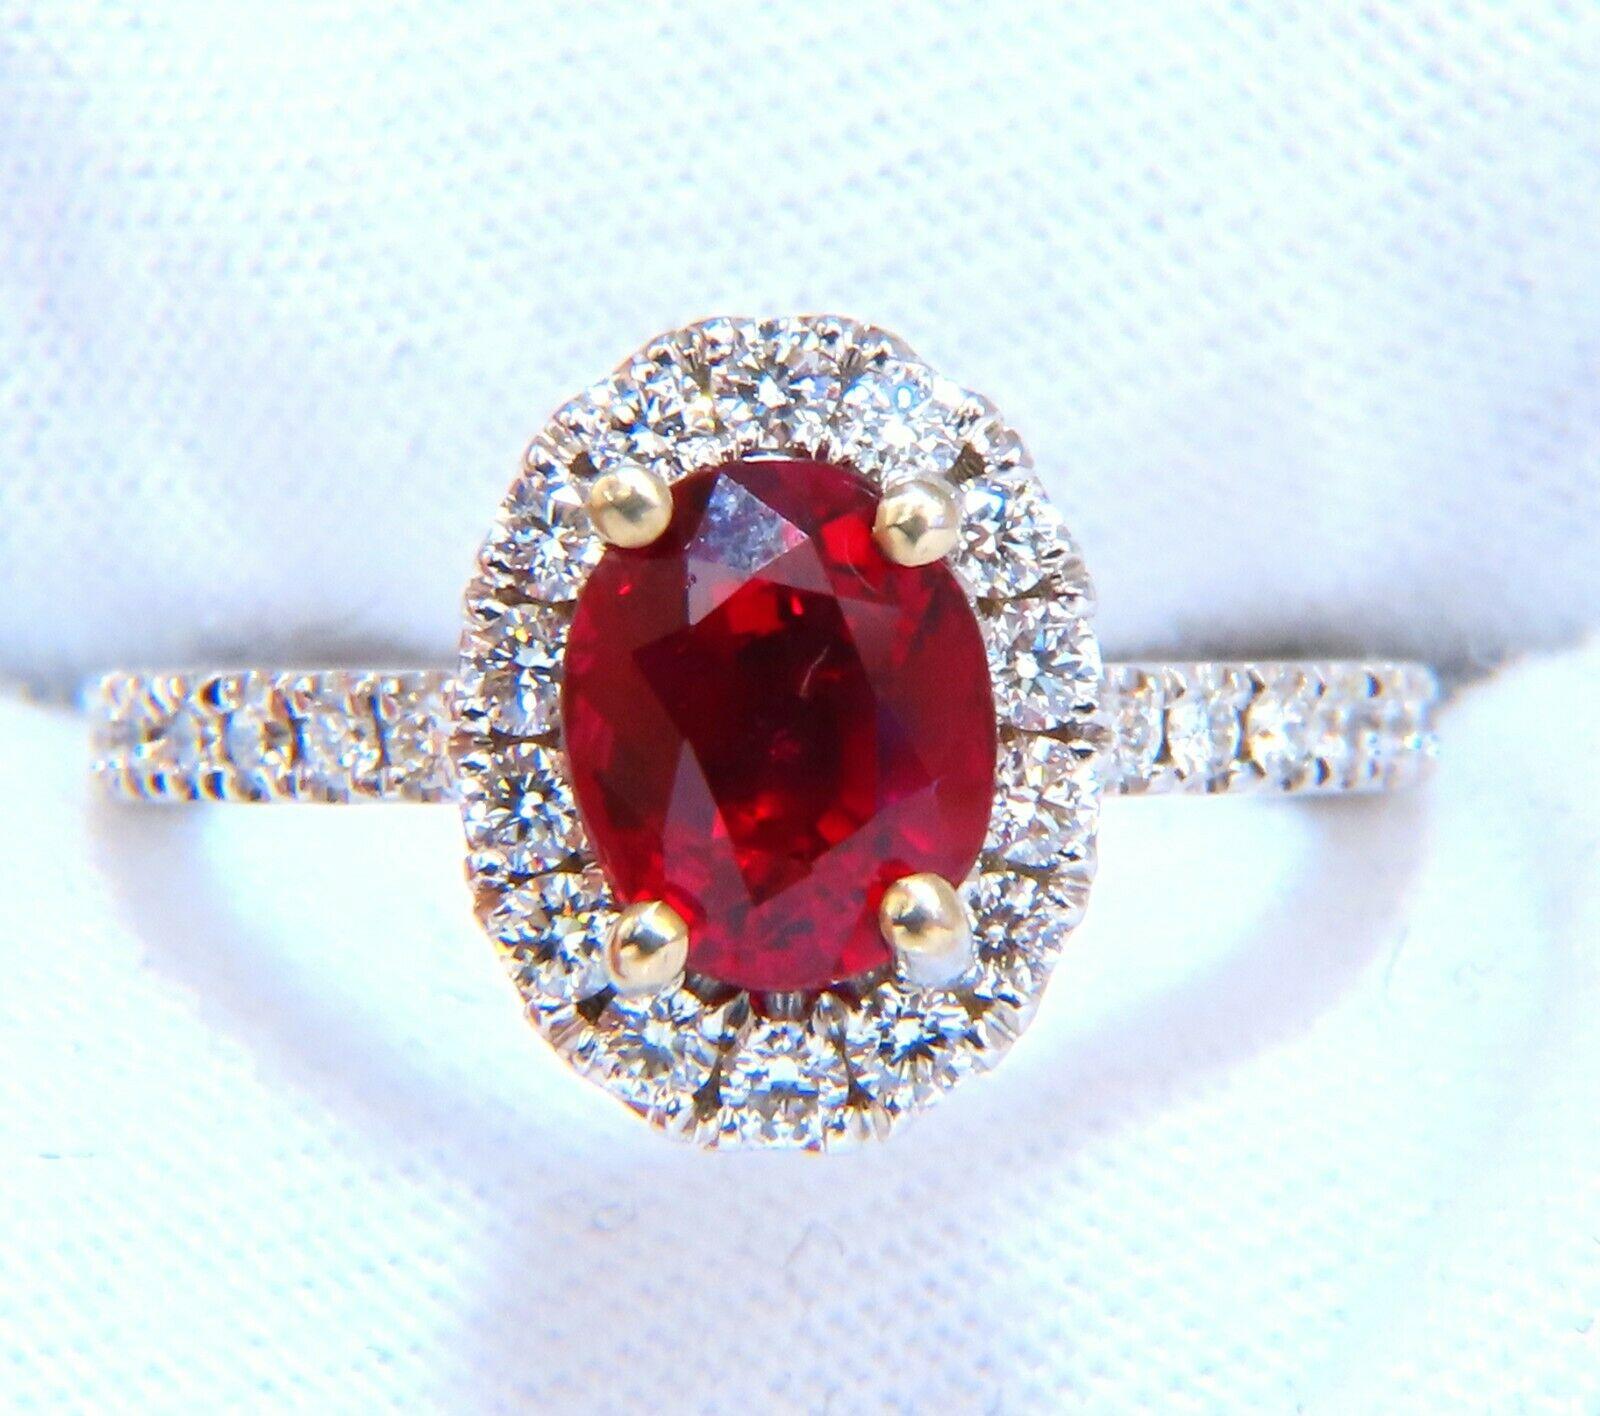 GIA Certified Ruby Diamonds Ballerina Cocktail Ring.

1.71ct. GIA Oval Bright Red Ruby

Report: 2175034926

(VS) Clean Clarity & Transparent.

7.31 X 5.95 X 4.66mm

GIA: Heat, Thailand



.50ct side round diamonds.

Vs-2 clarity, G color.

18kt.